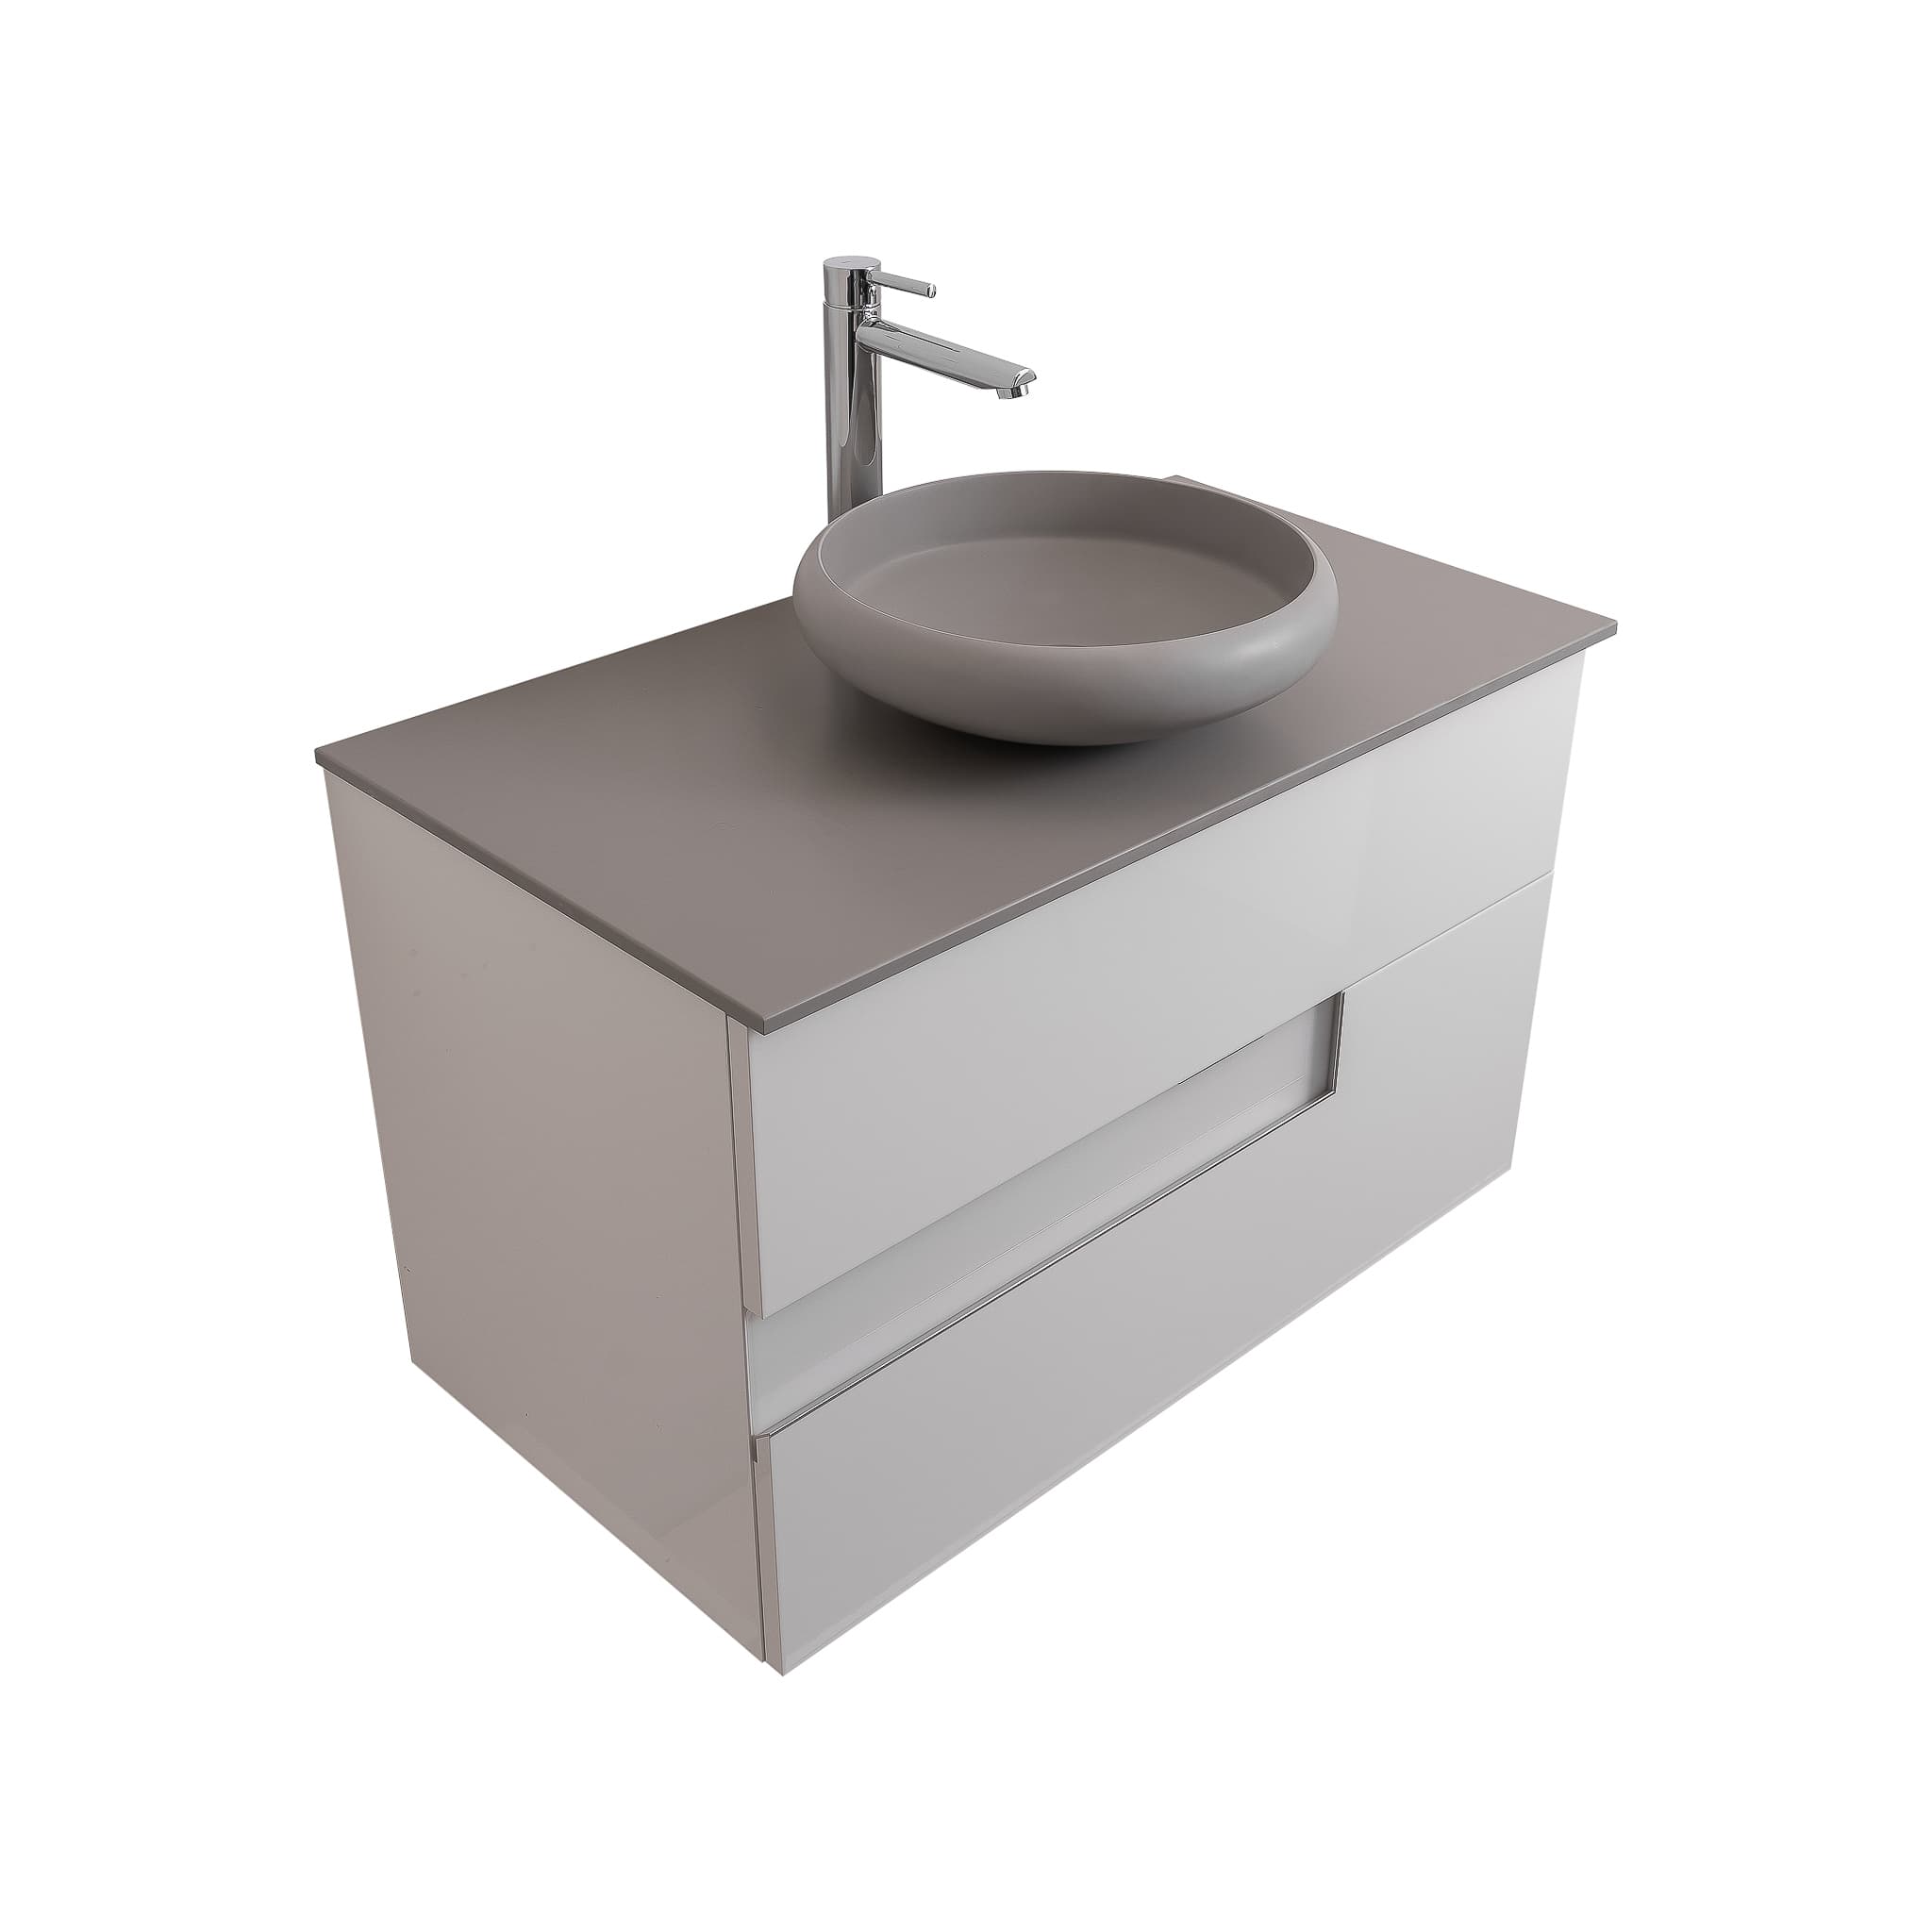 Vision 39.5 White High Gloss Cabinet, Solid Surface Flat Grey Counter And Round Solid Surface Grey Basin 1153, Wall Mounted Modern Vanity Set